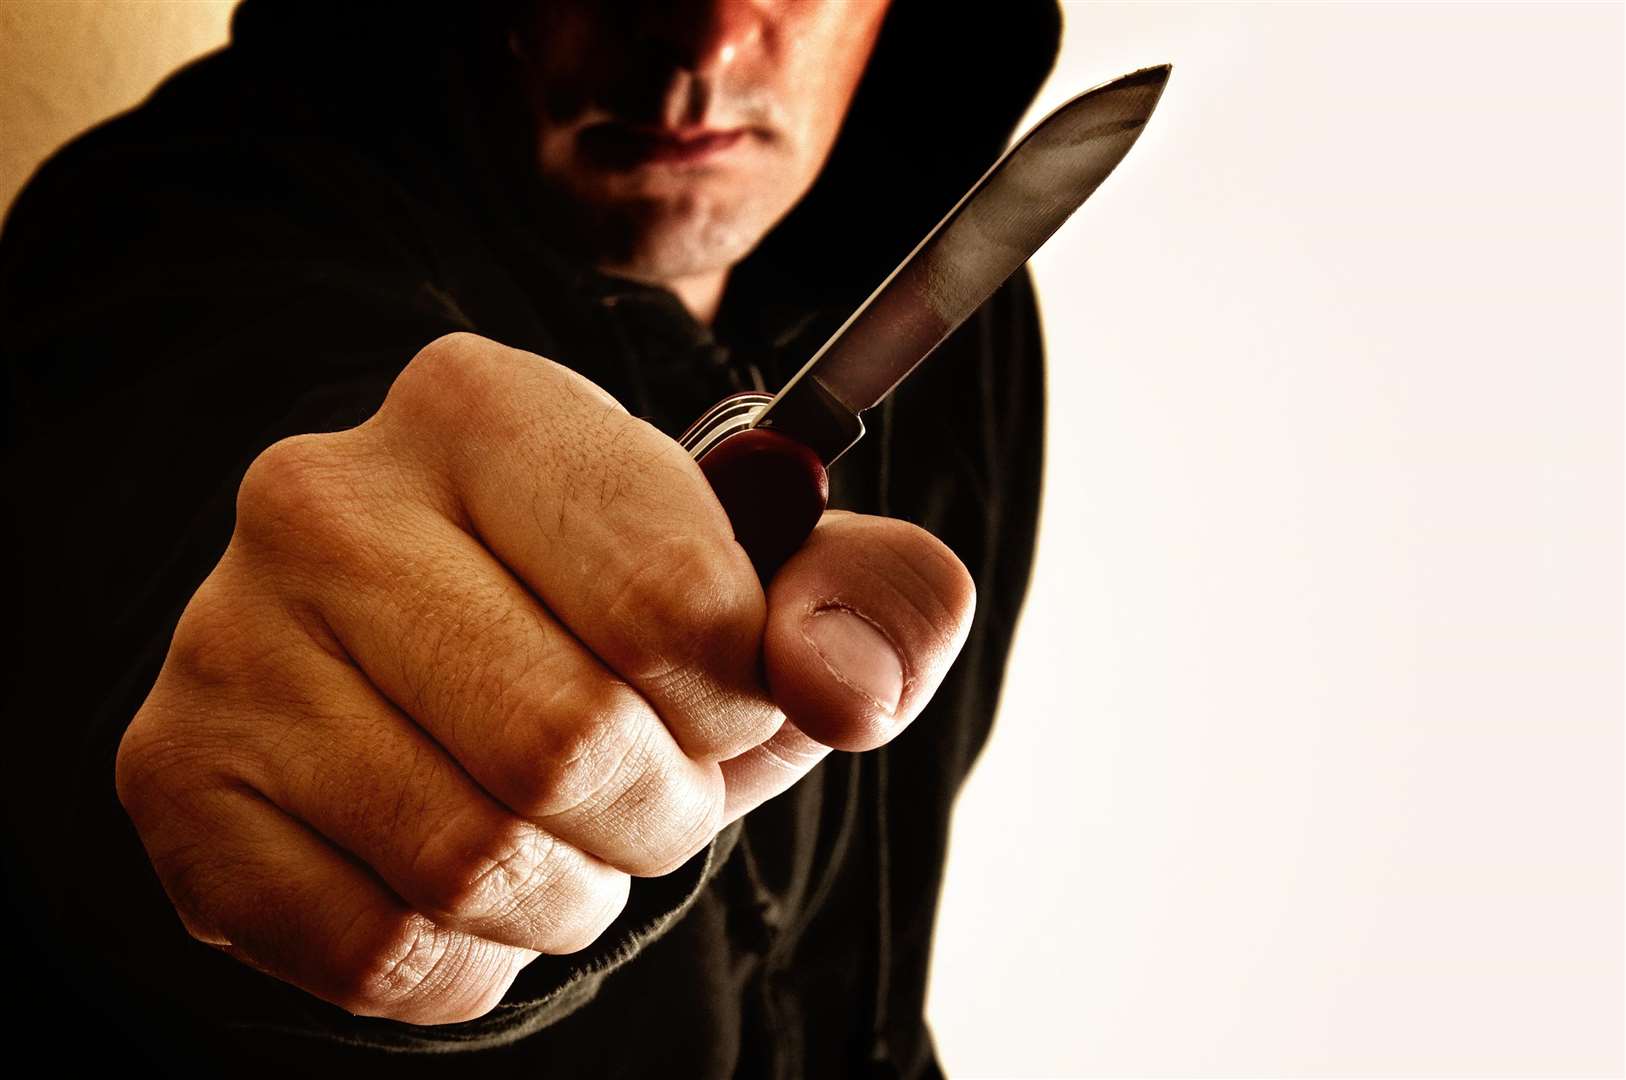 Women reported being threatened by a man with a knife. Stock image:Igor Stevanovic/Getty Images/iStockphoto